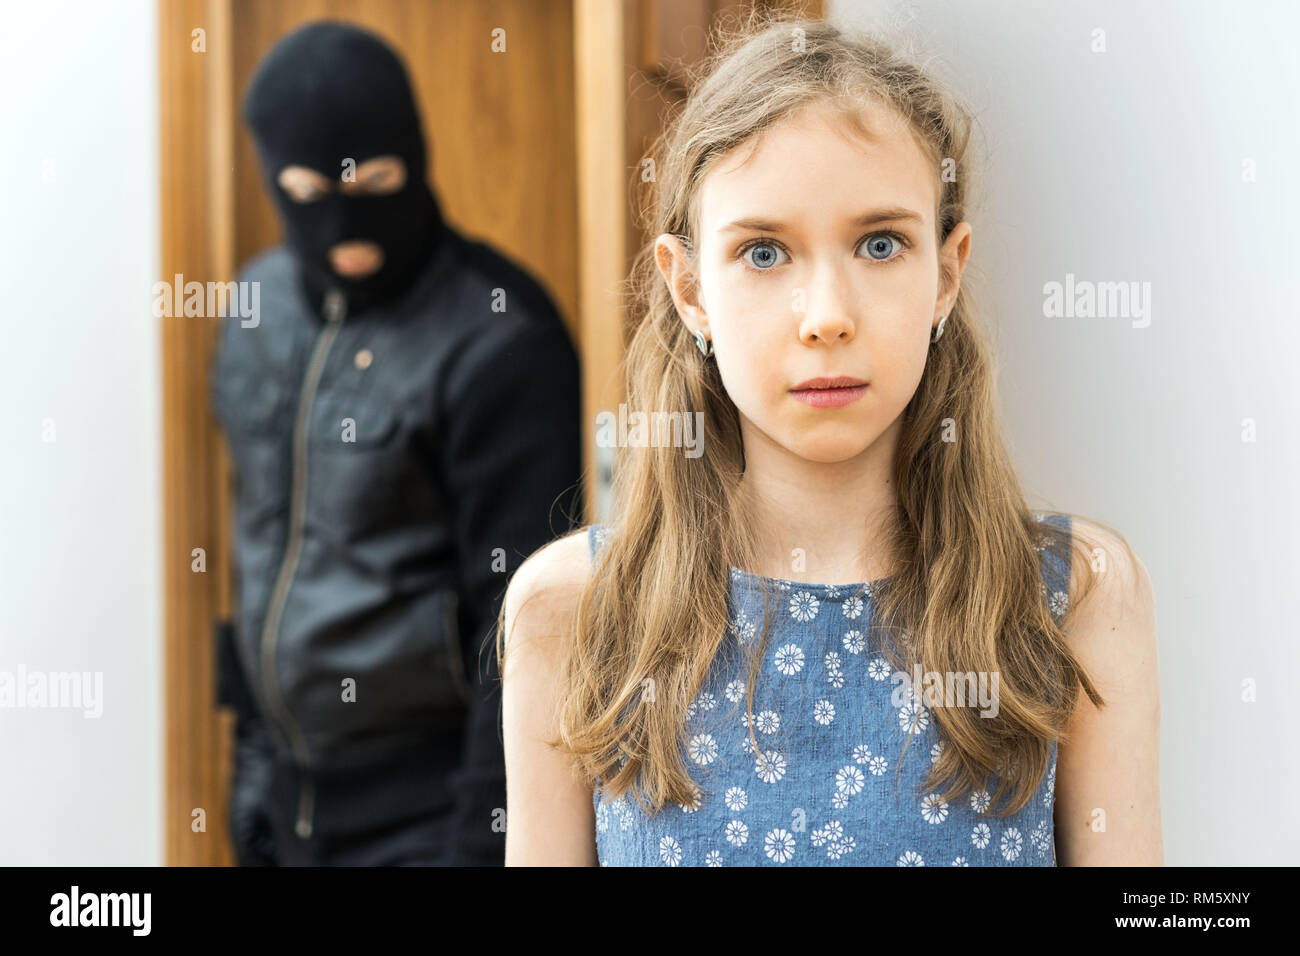 Shocked little girl and angry robber in the background. Stock Photo